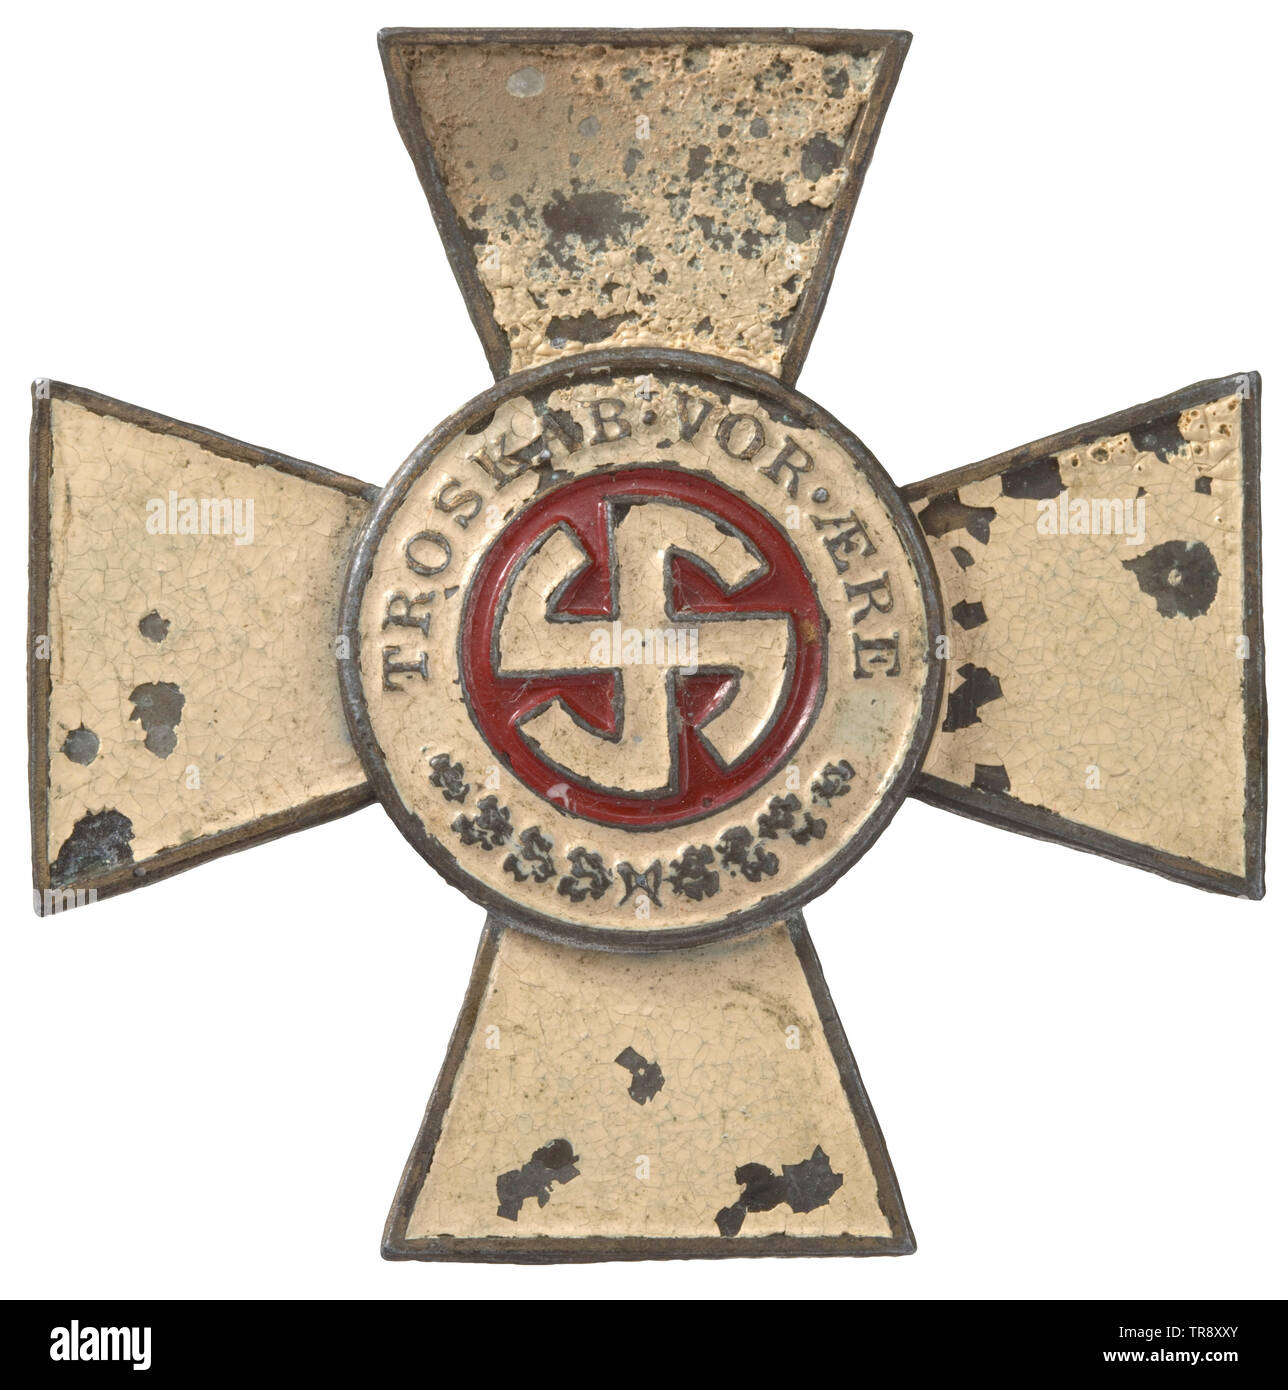 A Schalburg Cross for enlisted men/NCOs Fine zinc, coloured lacquer (flaws). Sun wheel with circumscription 'Troskab vor Ere', on the reverse a short attachment pin. Dimensions 5 x 5 cm. The cross was awarded to members of Freikorps 'Danmark' (later known as the 'Schalburg' Korps) following active service (as well as posthumously). historic, historical, 20th century, 1930s, 1940s, Waffen-SS, armed division of the SS, armed service, armed services, NS, National Socialism, Nazism, Third Reich, German Reich, Germany, military, militaria, utensil, piece of equipment, utensils, , Editorial-Use-Only Stock Photo